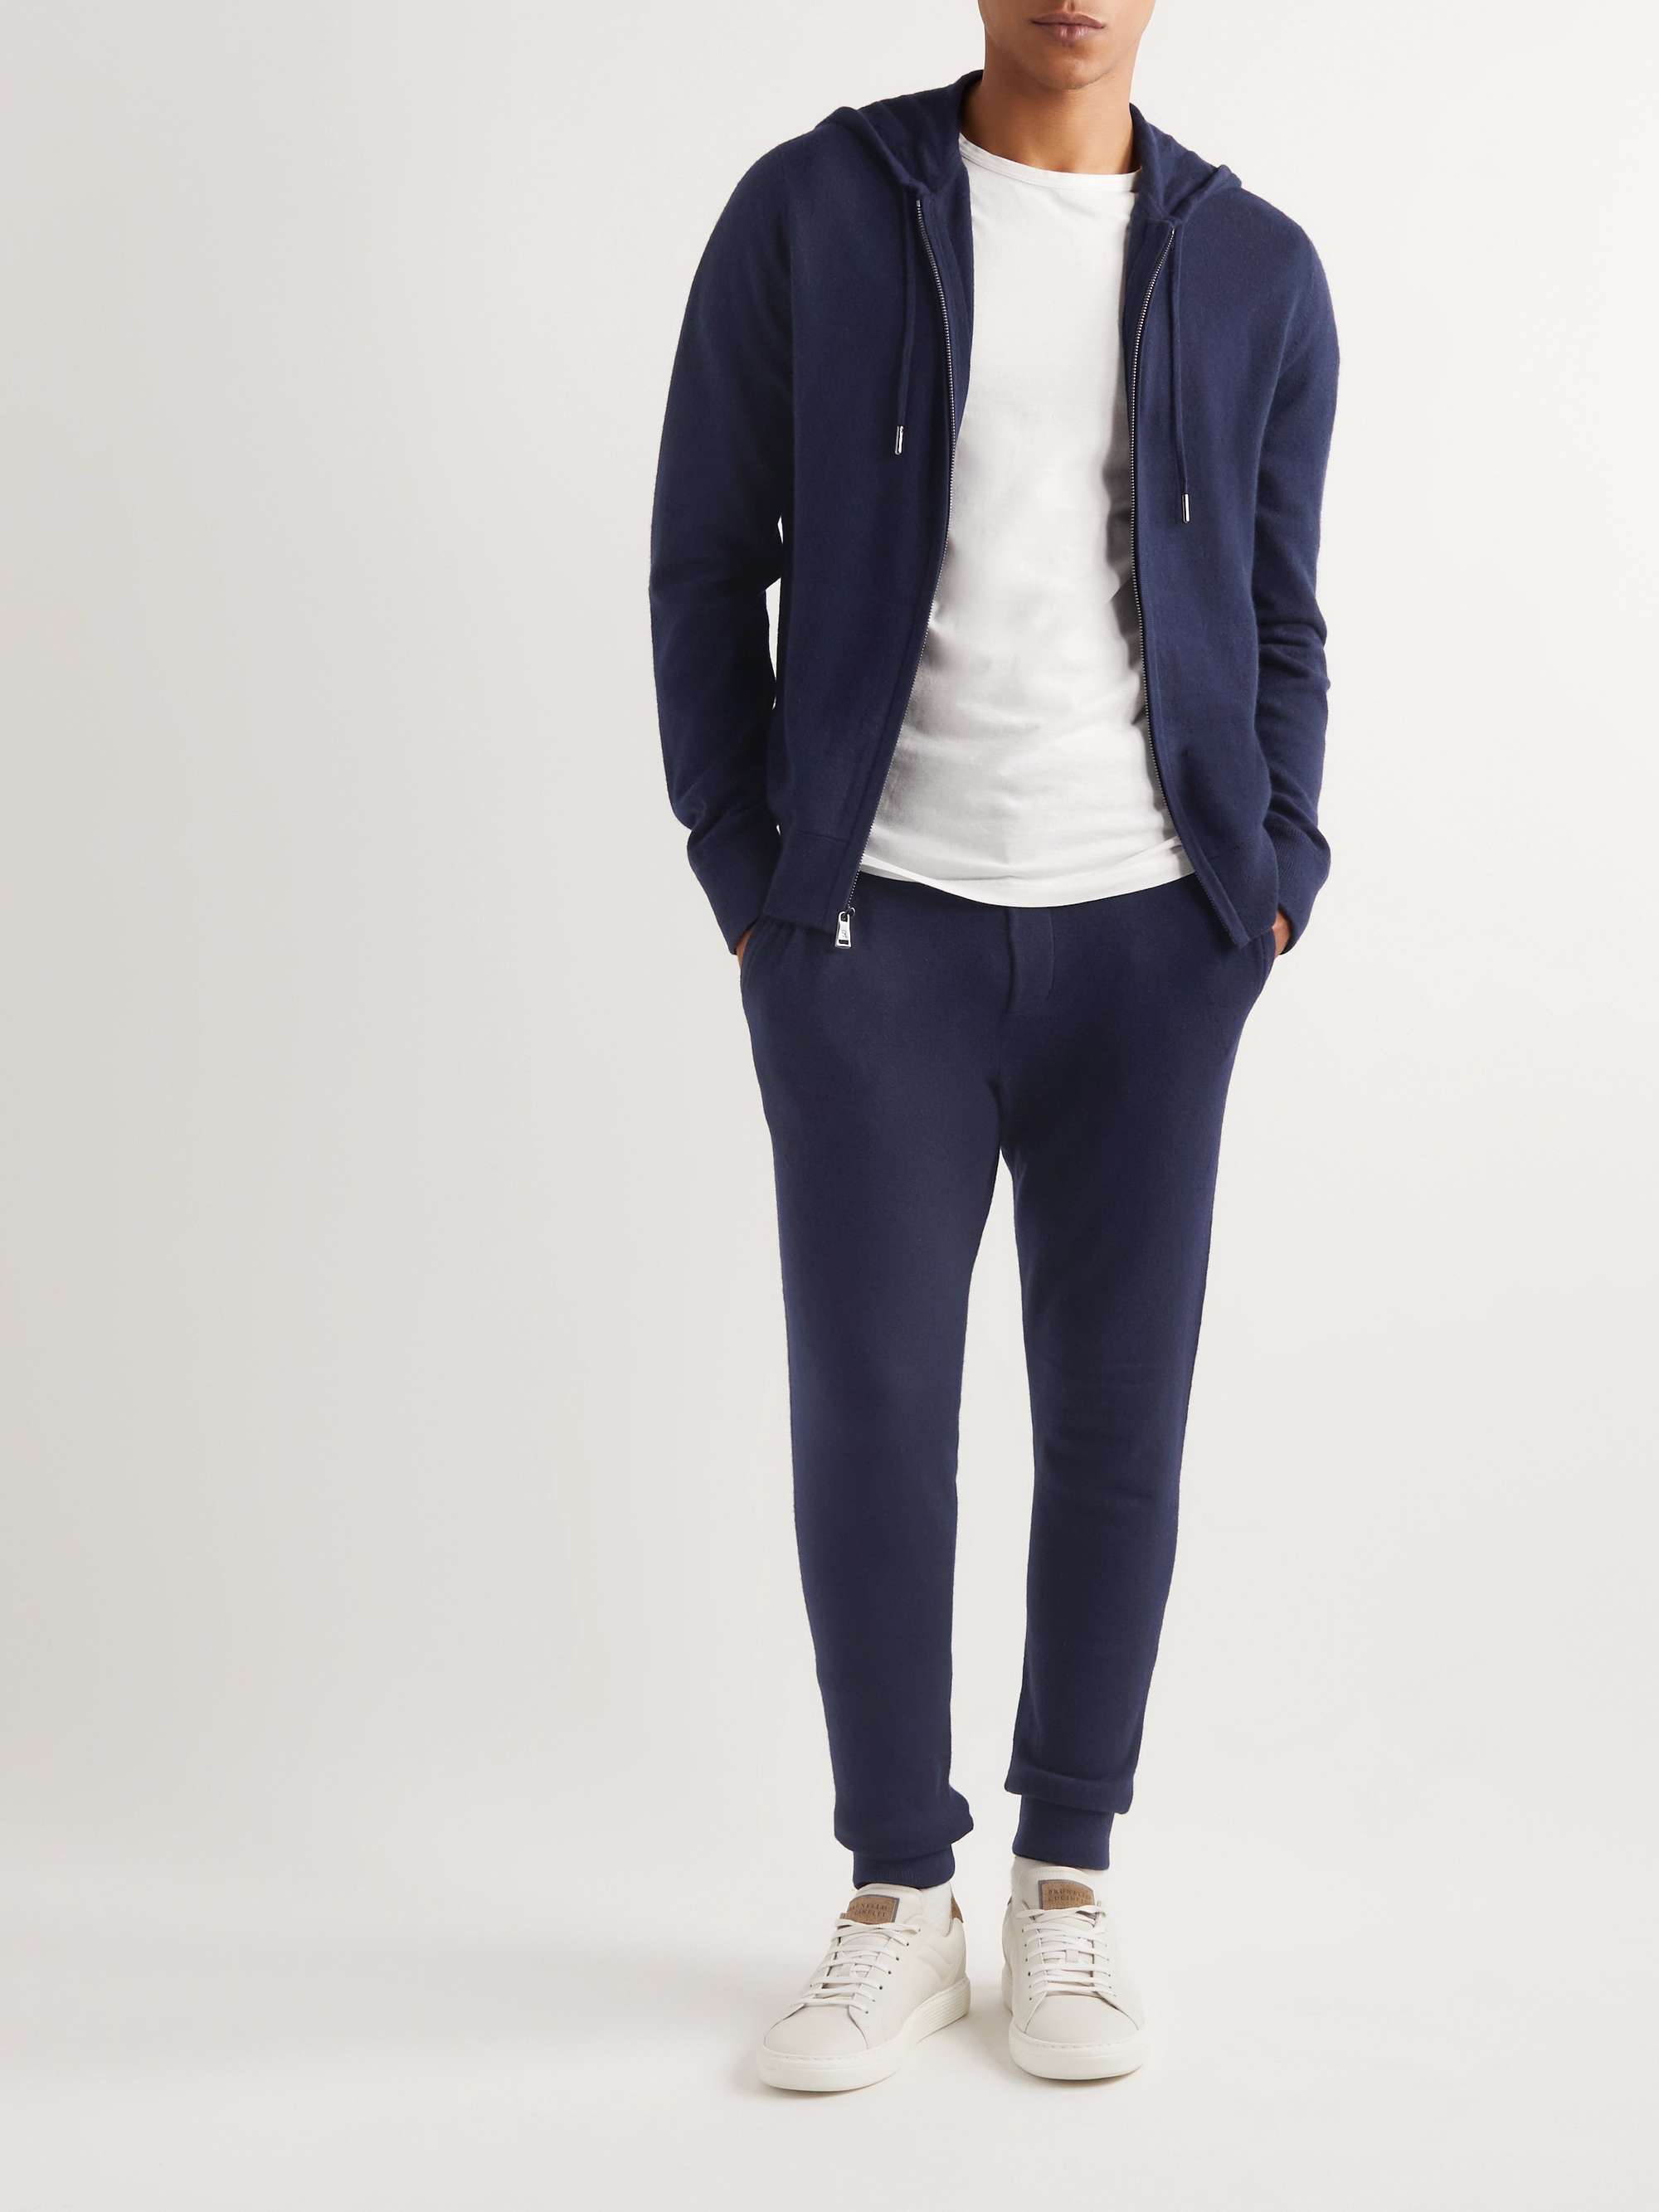 RALPH LAUREN PURPLE LABEL Tapered Wool and Cashmere-Blend Sweatpants